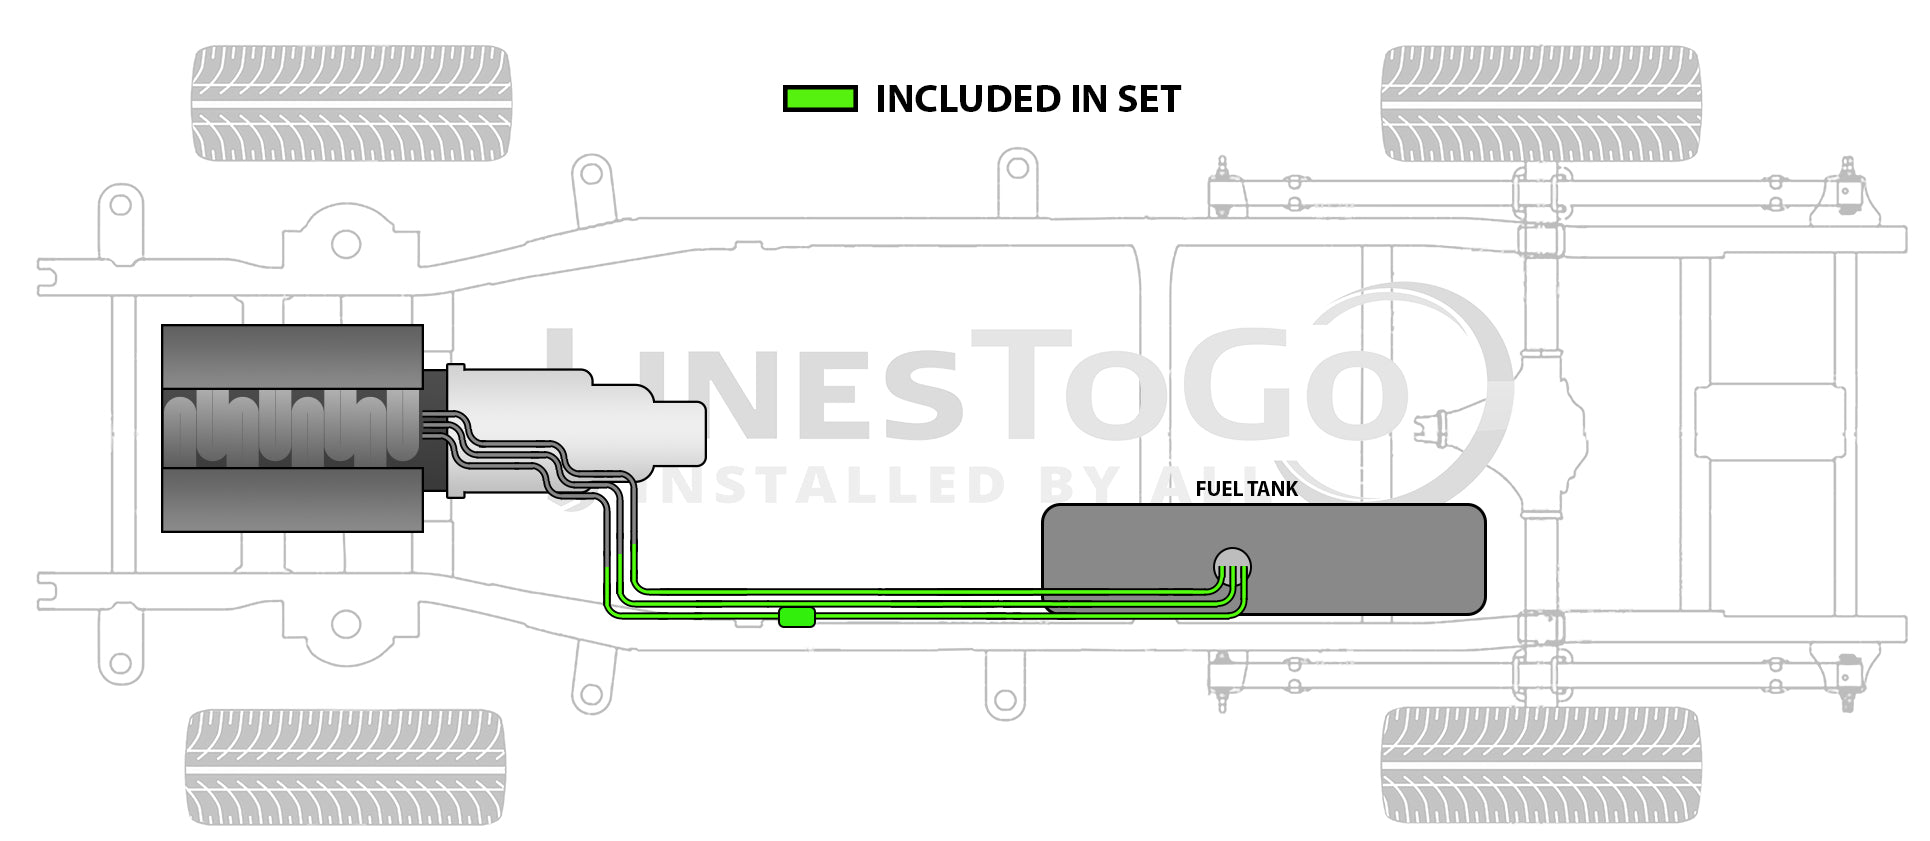 Chevy Suburban Intermediate/Rear Fuel and Brake Line Set 1990 V2500 Only 4WD Gas 7.4L FL507-G1F